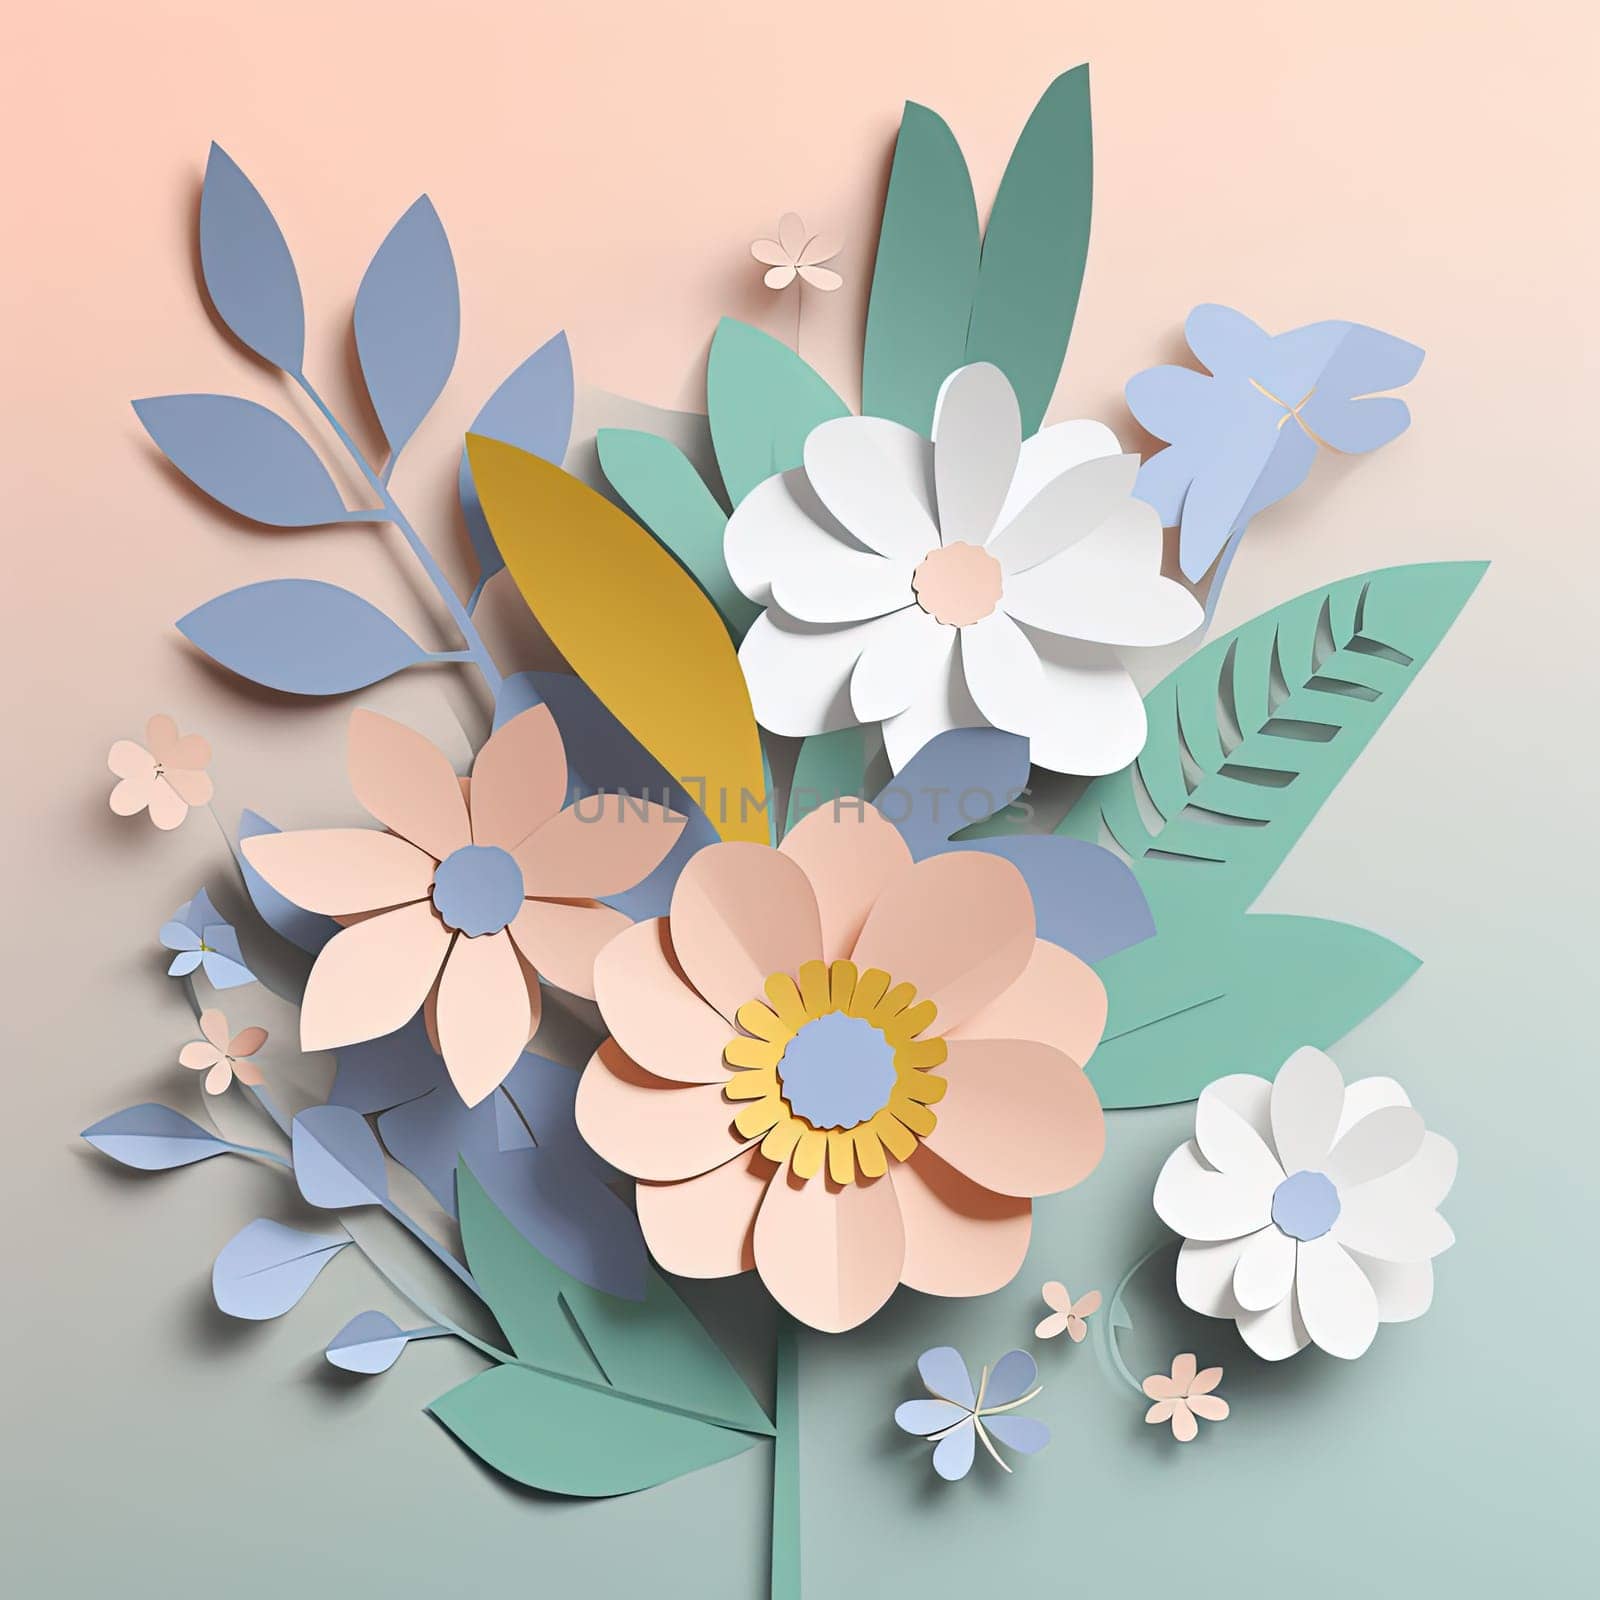 Pastel Colors Brighten Quilling Illustration On Paper, Adorned With Flowers